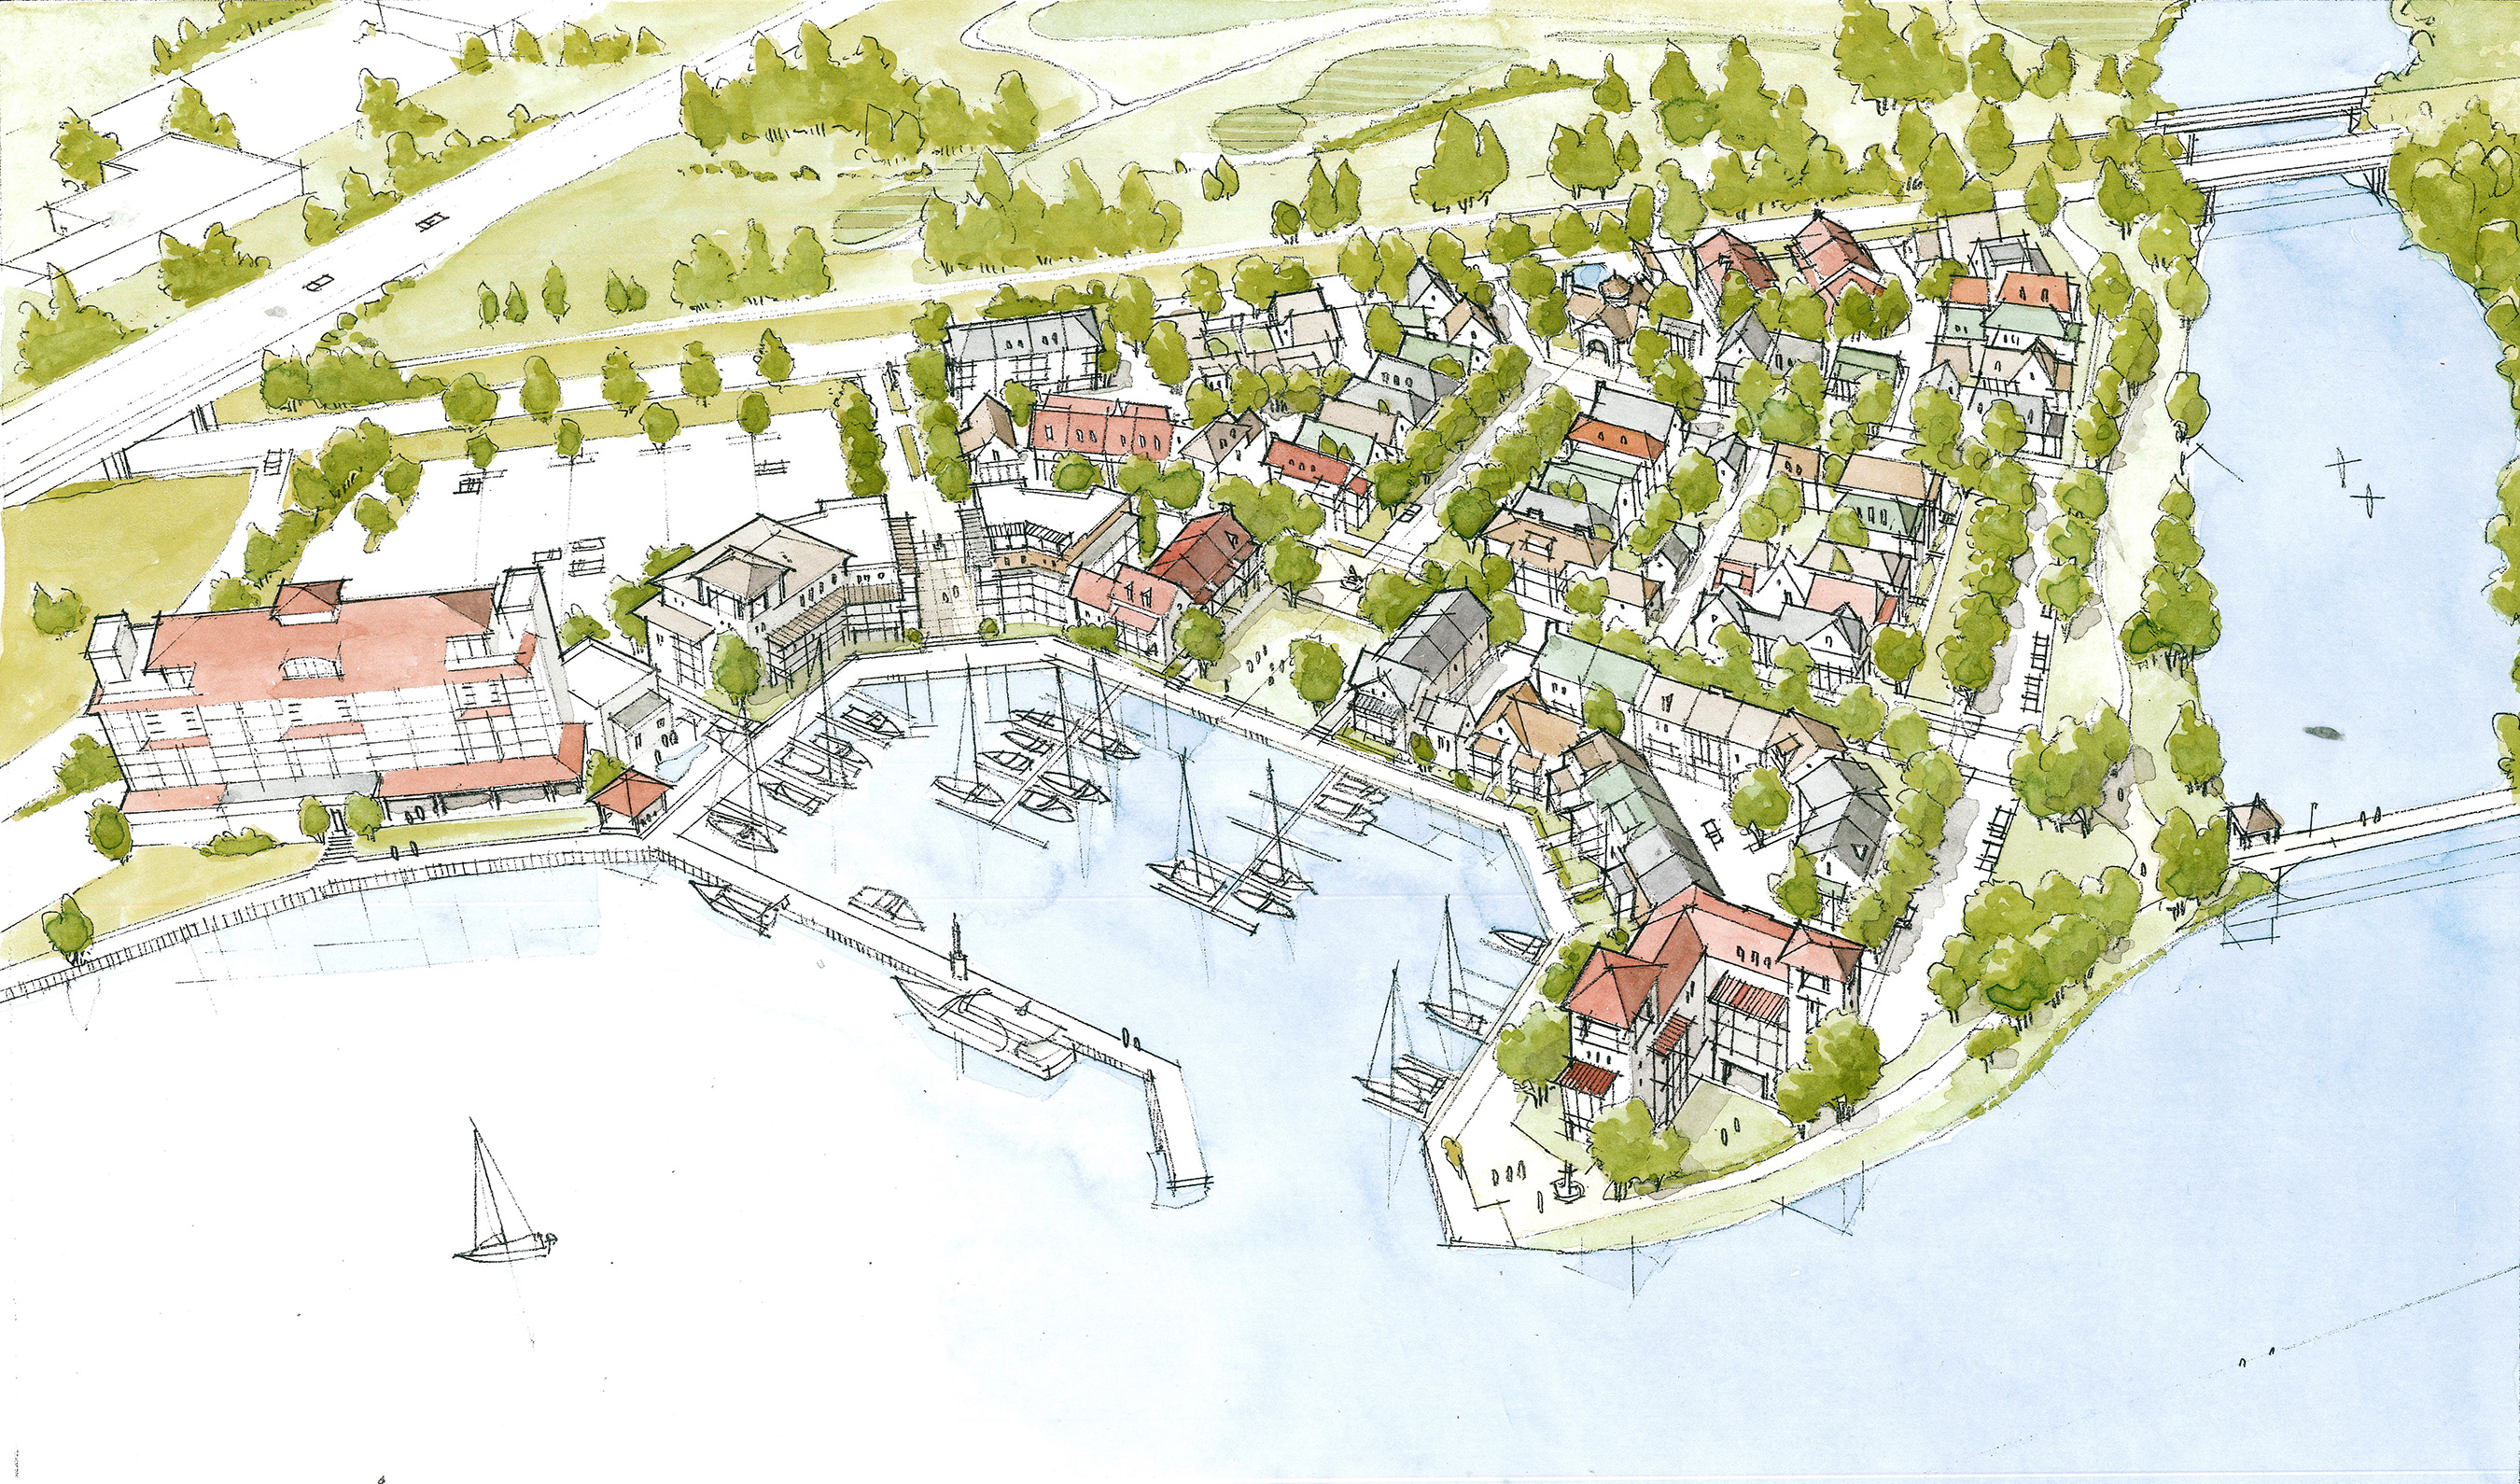 Situated on nearly 11-acres, Harbor Village offers a variety of floor plans and home prices, allowing for diversity among homebuyers.